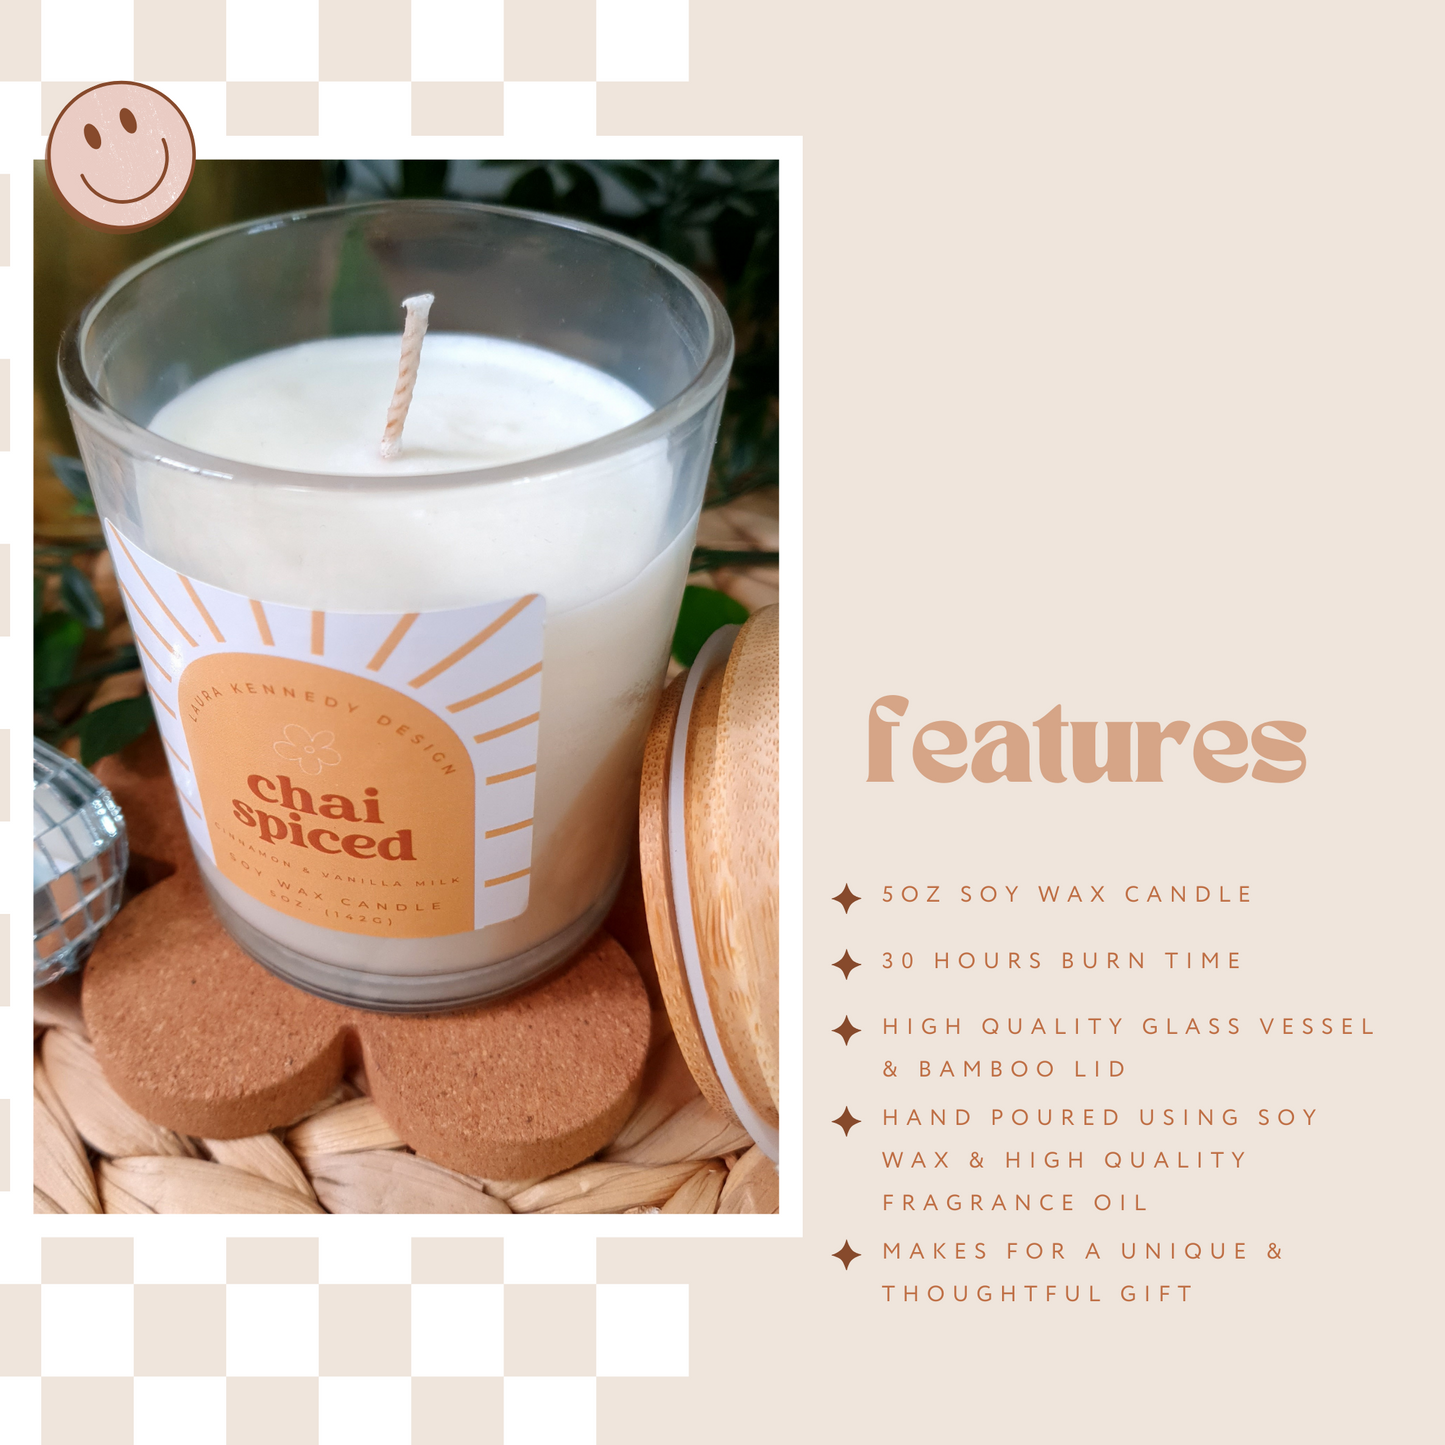 ☕🕯️"Chai Spiced" - Cinnamon Scented 5oz Soy Wax Candle